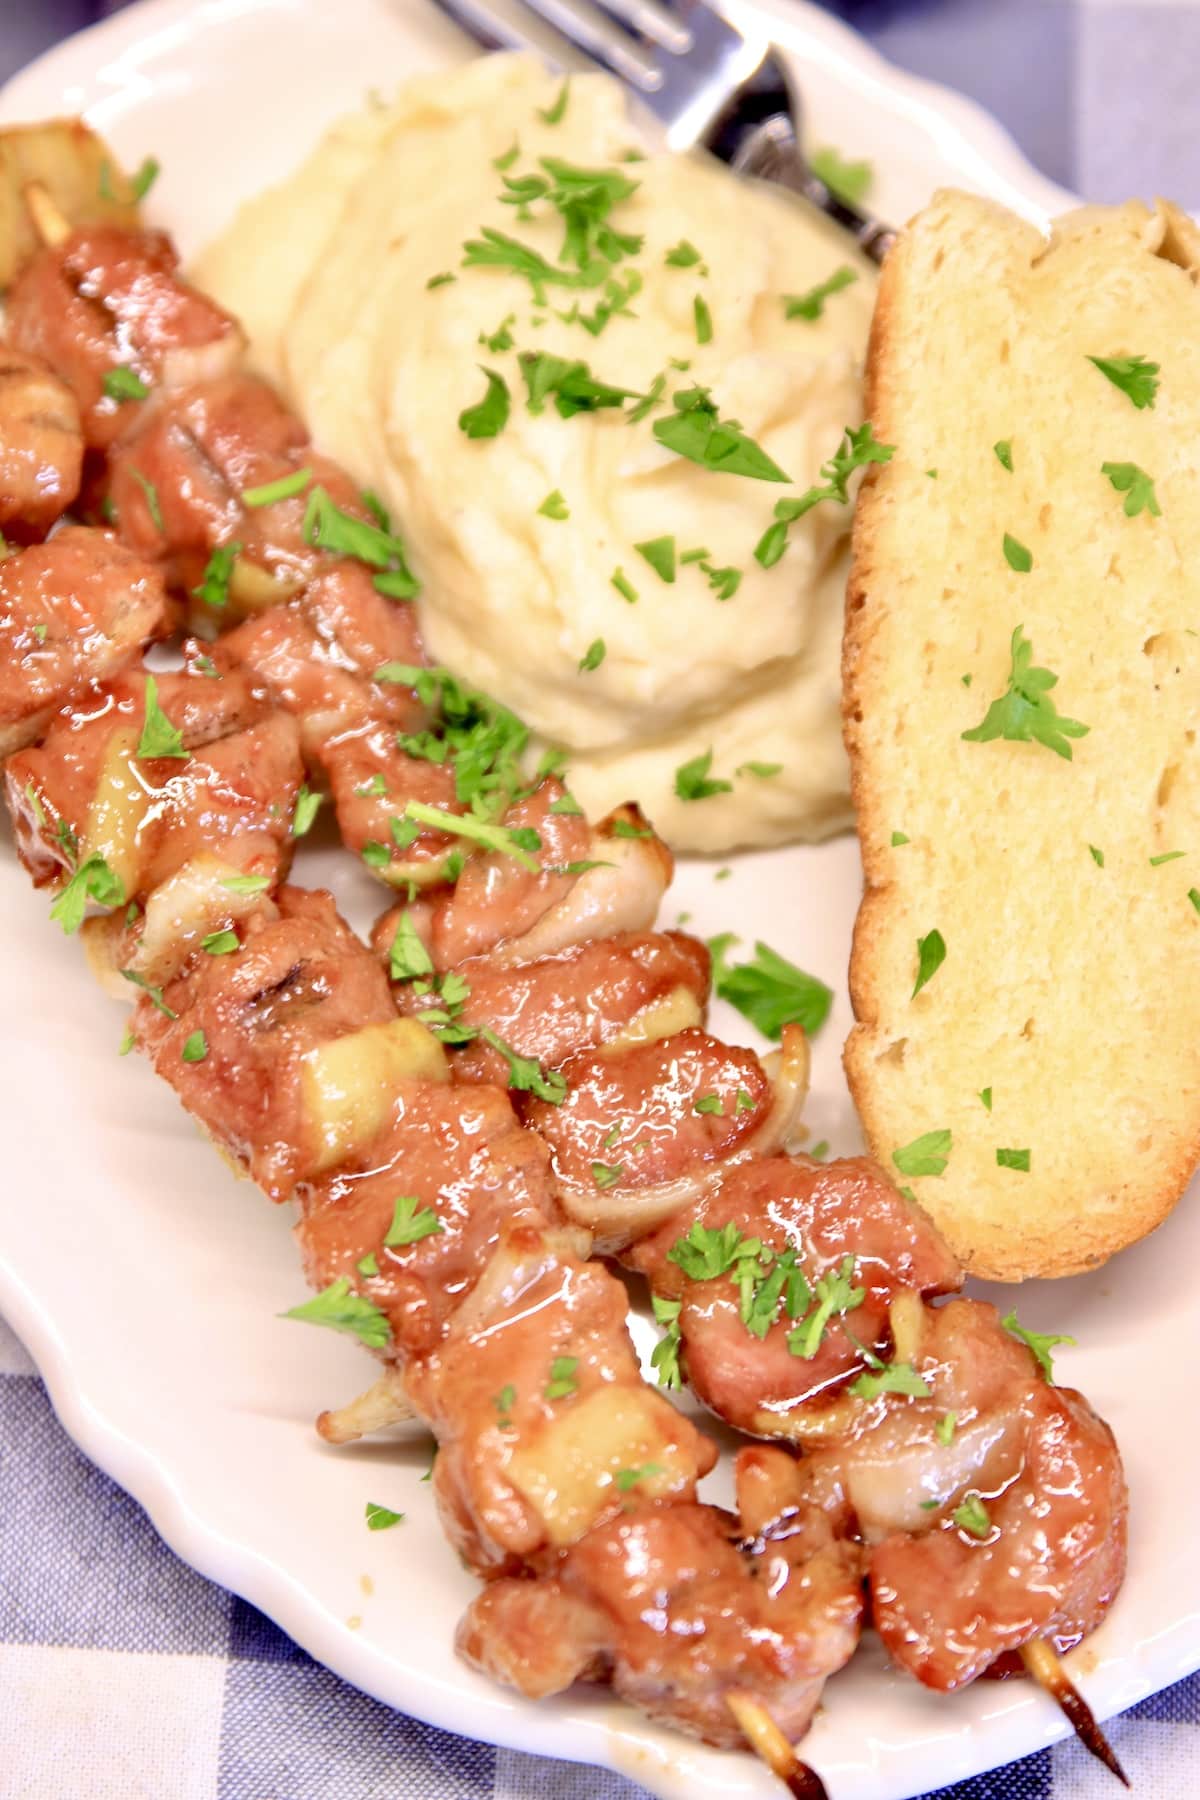 Grilled pork kabobs on a plate with mashed potatoes and garlic bread.